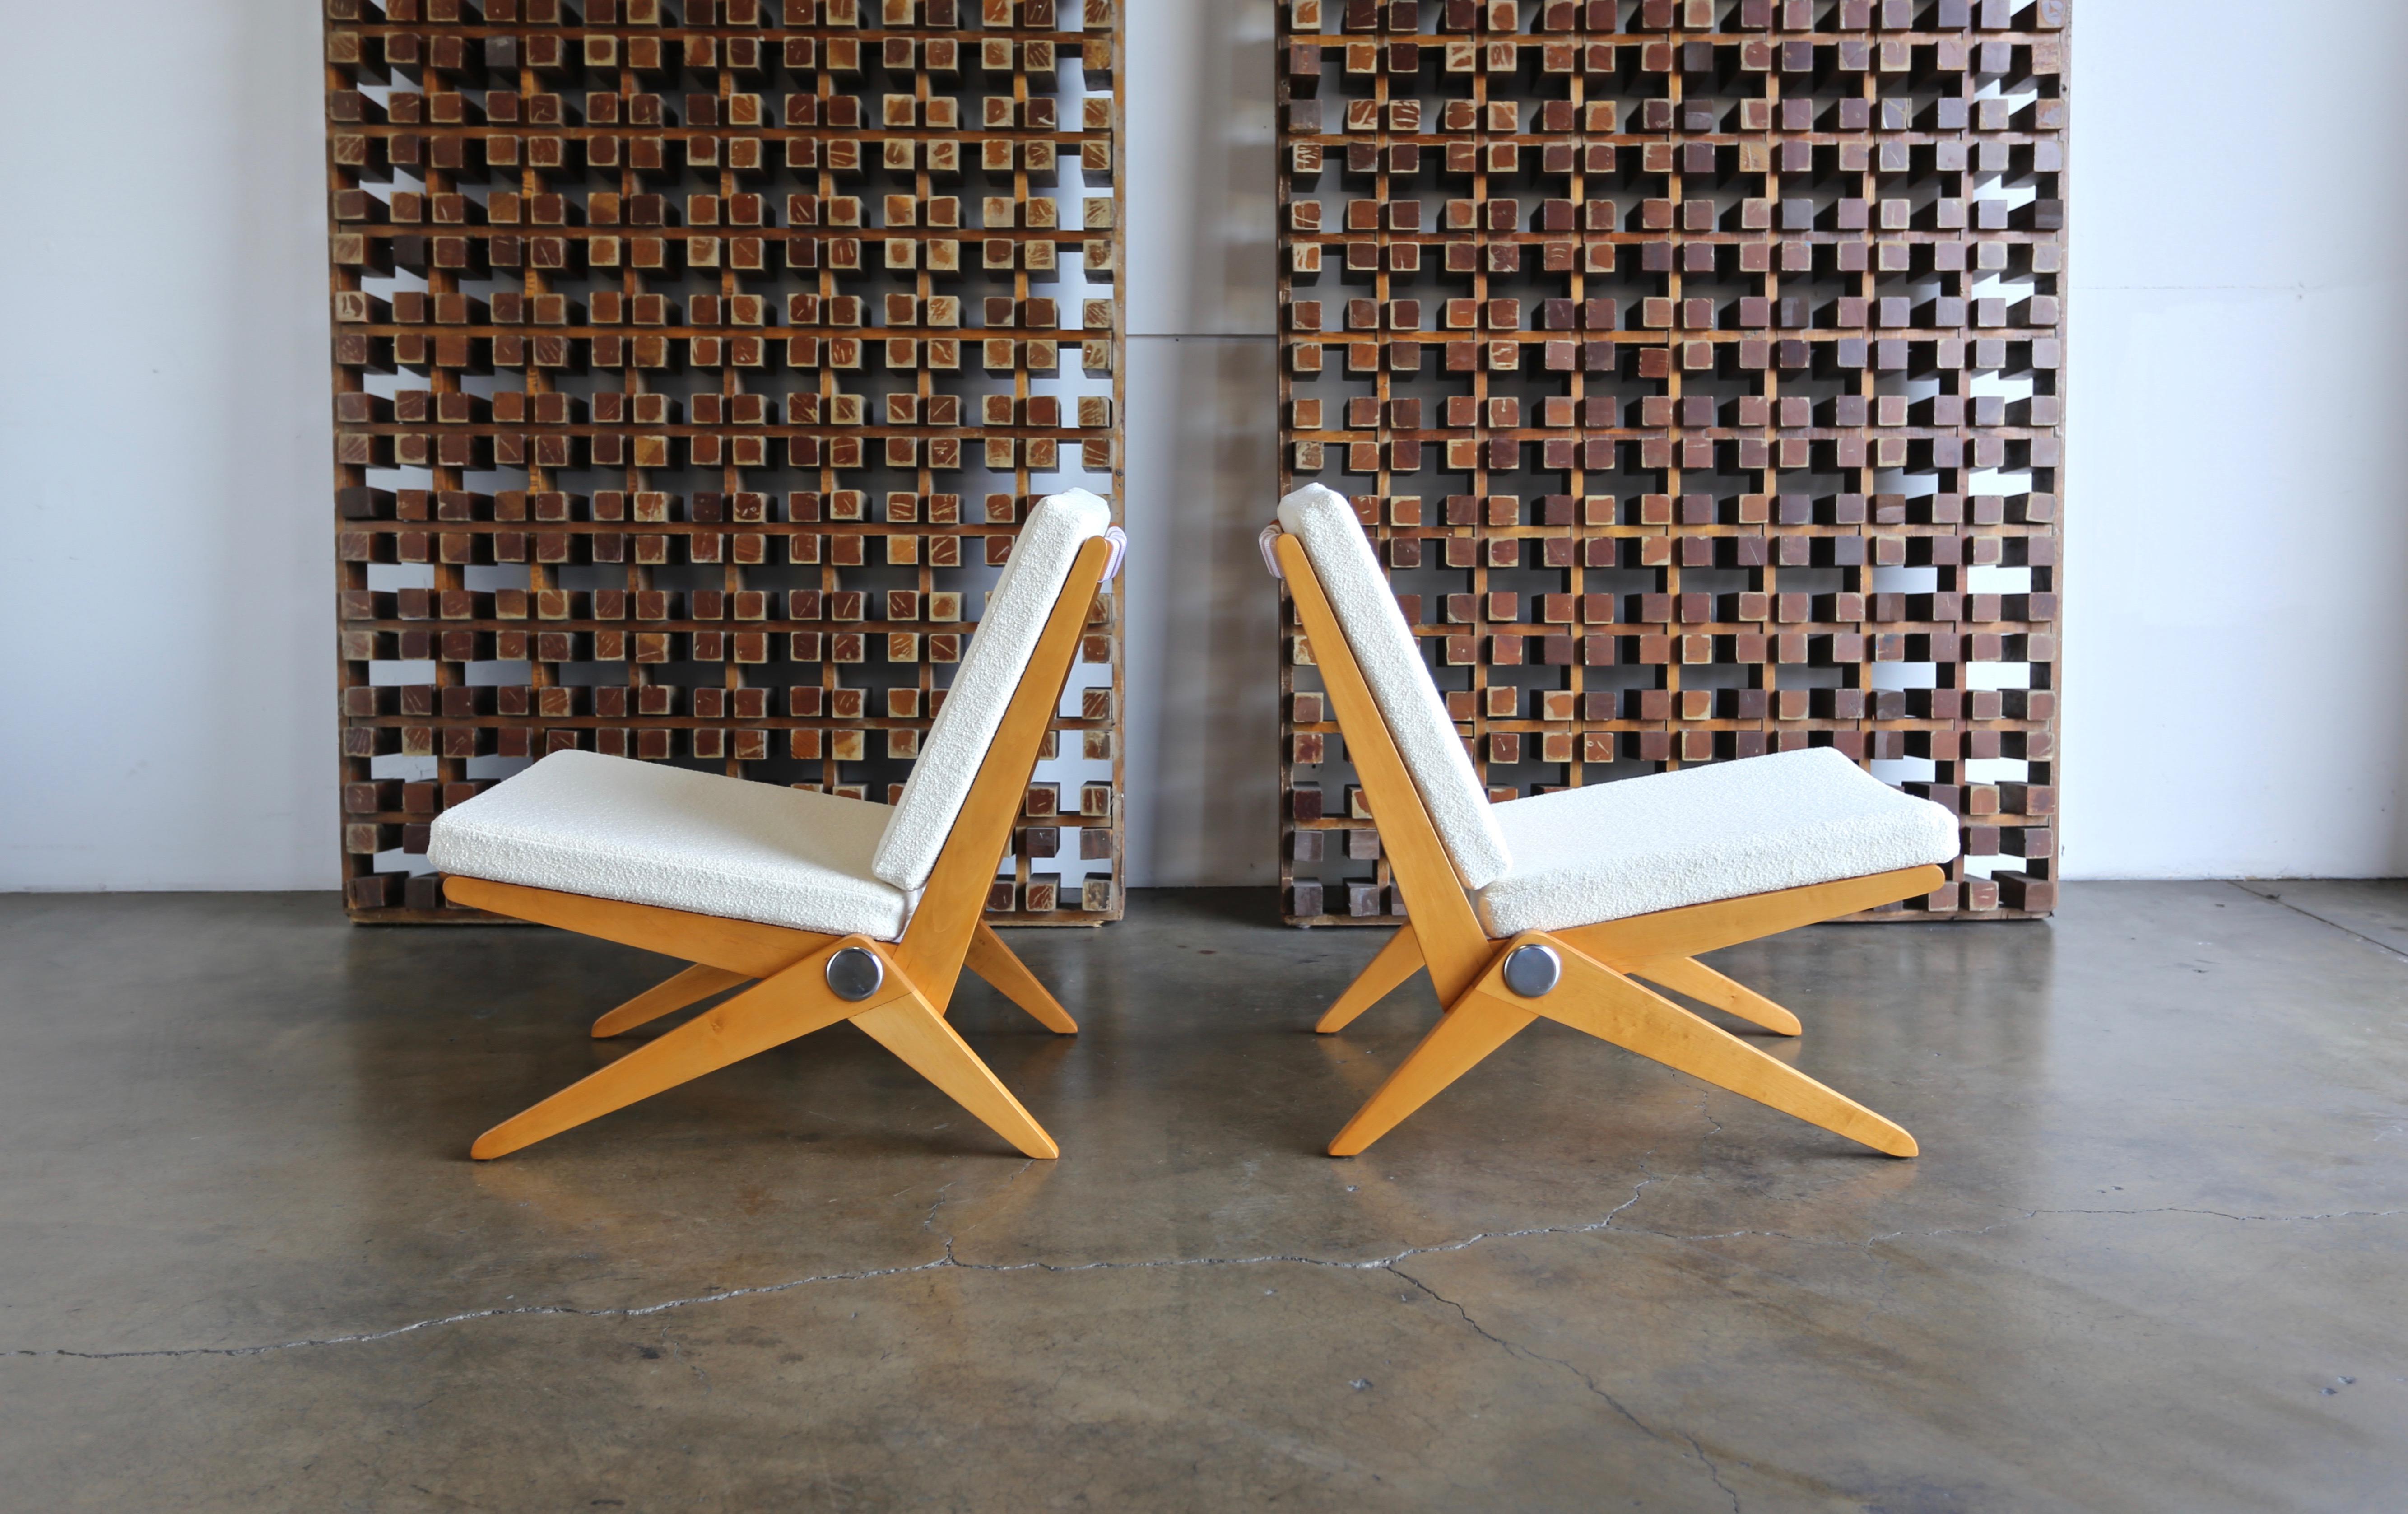 Pair of Scissor lounge chairs by Pierre Jeanneret for Knoll International, circa 1955. This pair has been professionally restored. New Knoll white bouclé upholstery.